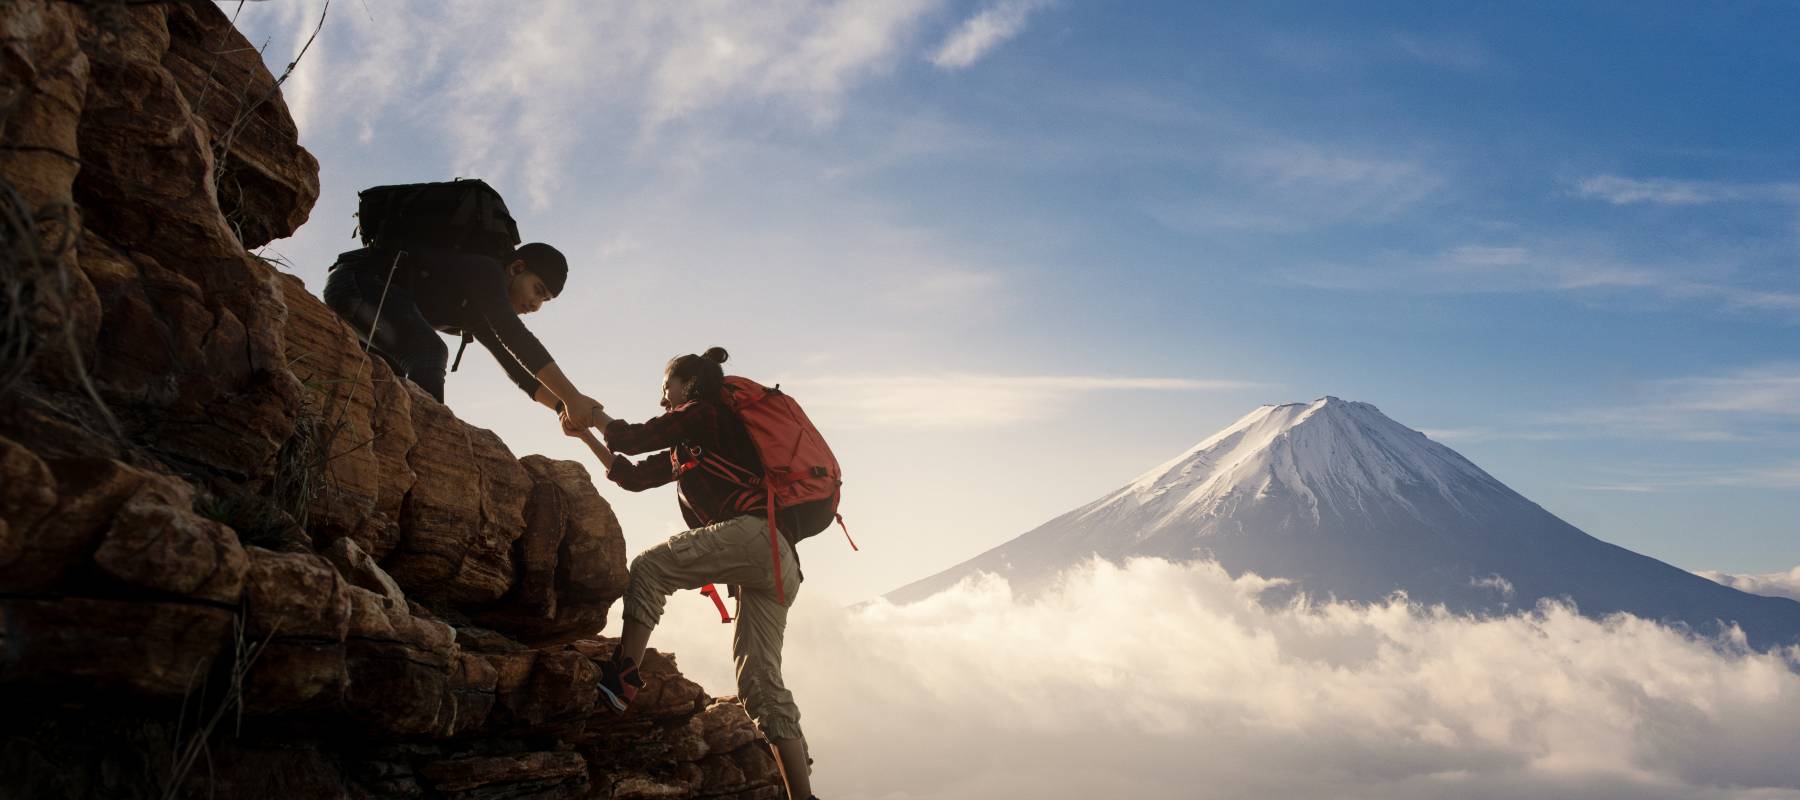 Two mountain climbers, one pulling the other up with a mountain seen in the misty background.